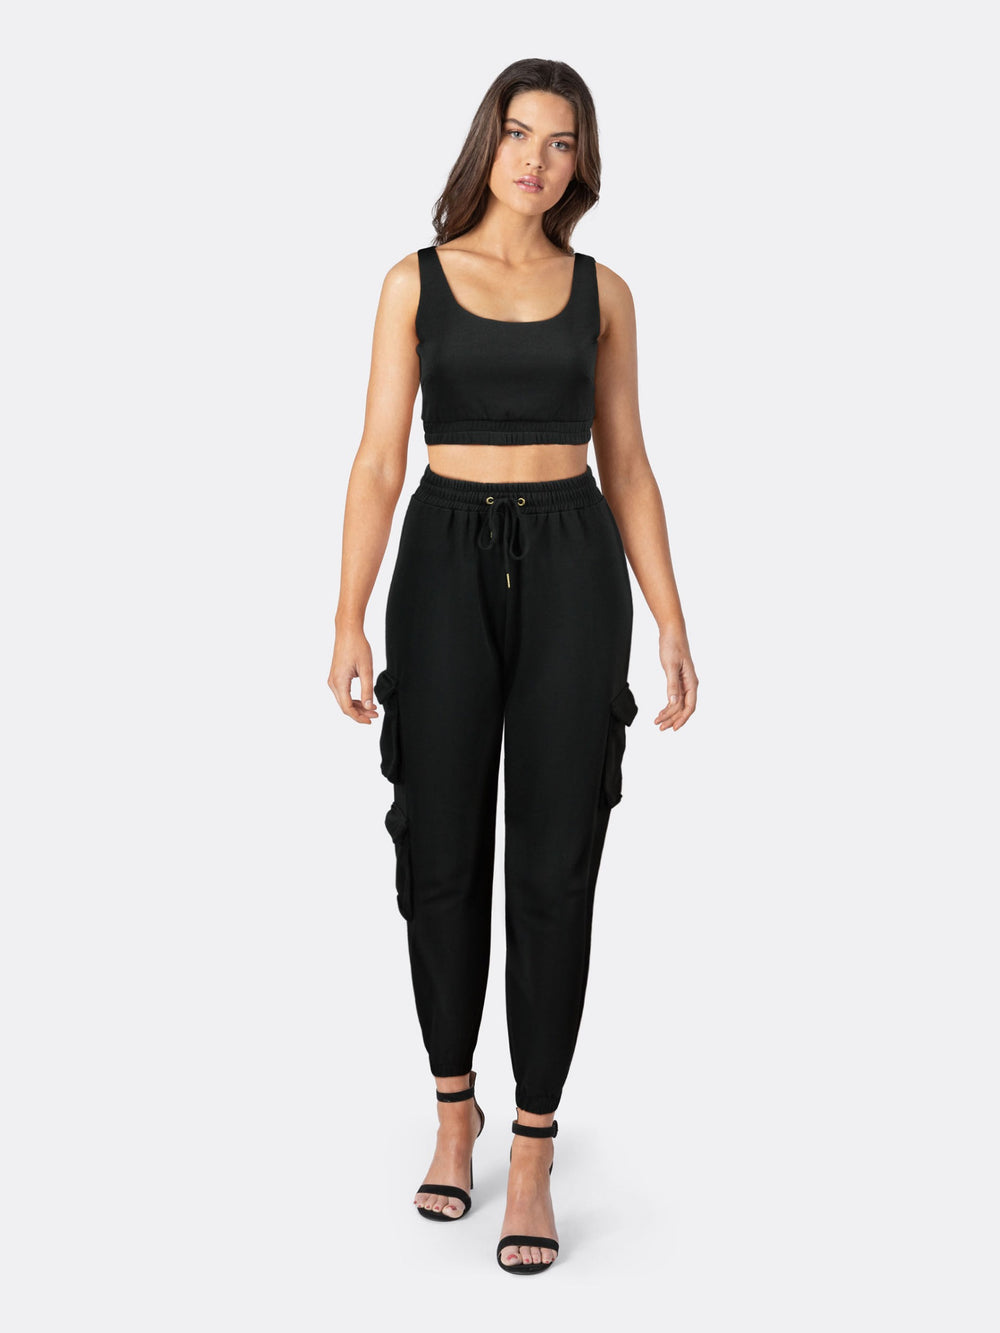 Pack of Joggers with Pockets and Crop Top Black Front | Jolovies